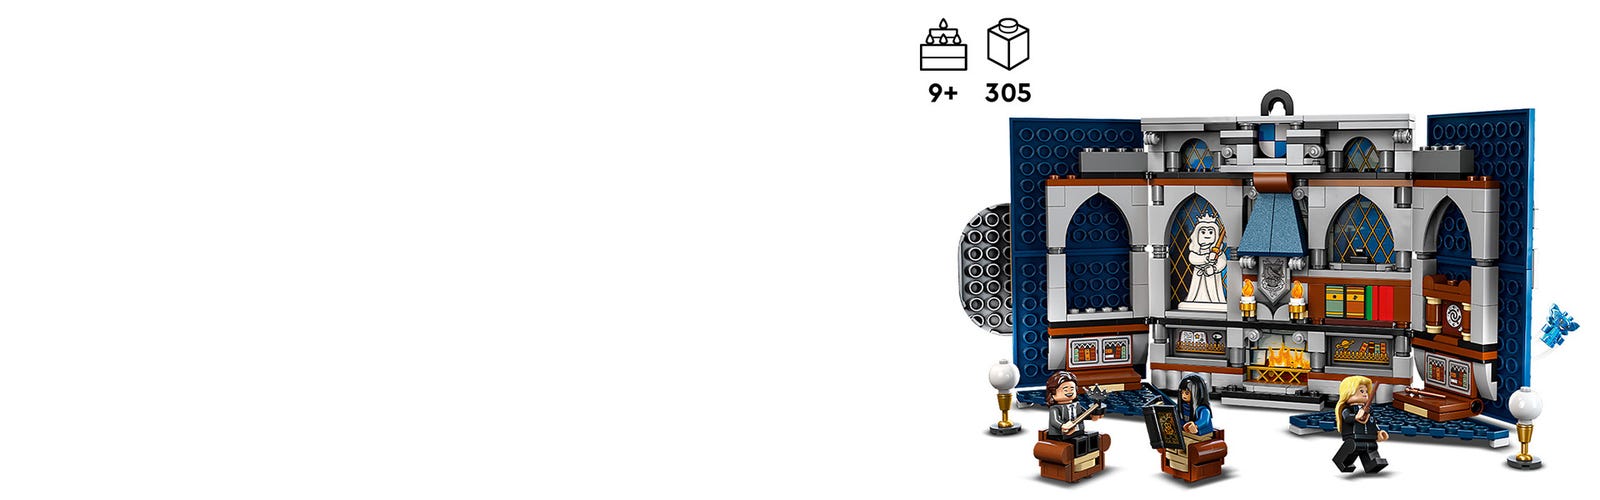 76411 US Banner Ravenclaw™ at | | online the Potter™ Harry Buy House LEGO® Shop Official